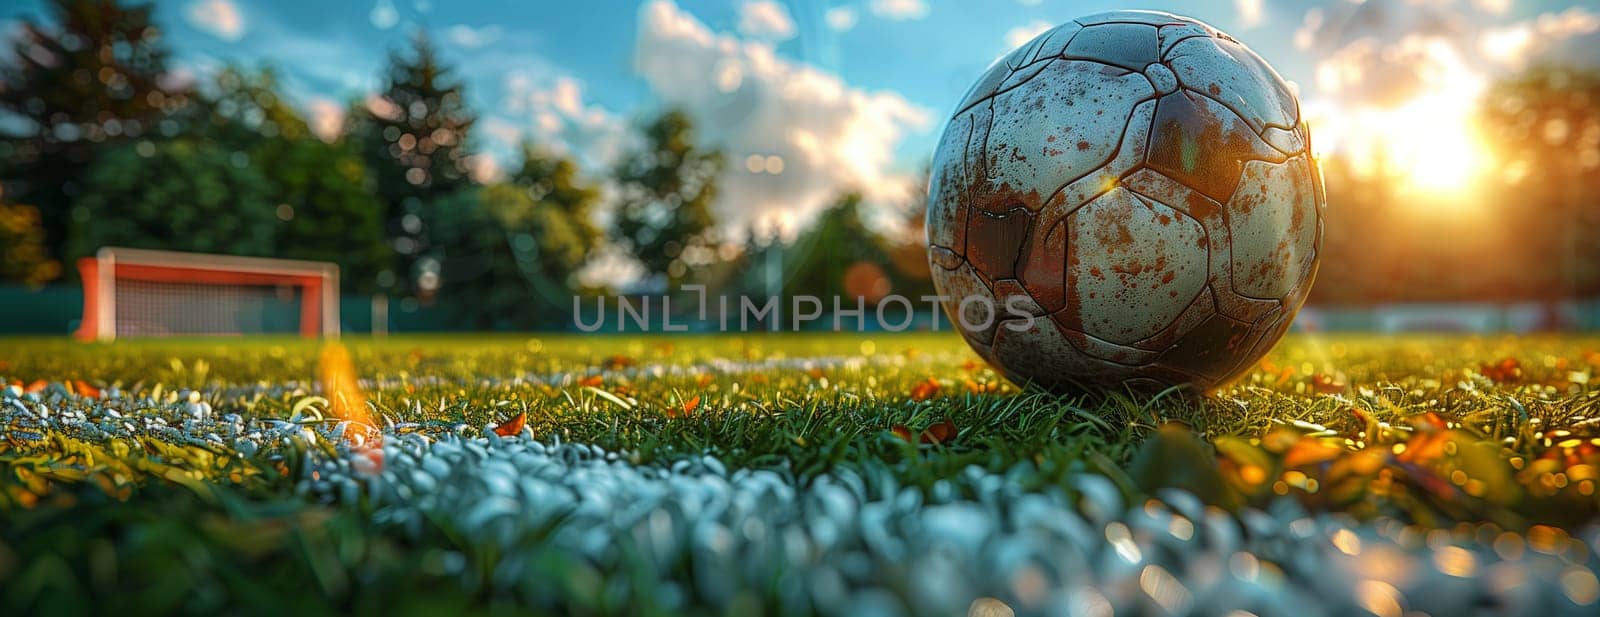 A soccer ball rests on the lush grass of a soccer field, blending into the natural landscape as people engage in leisure and fun playing sports